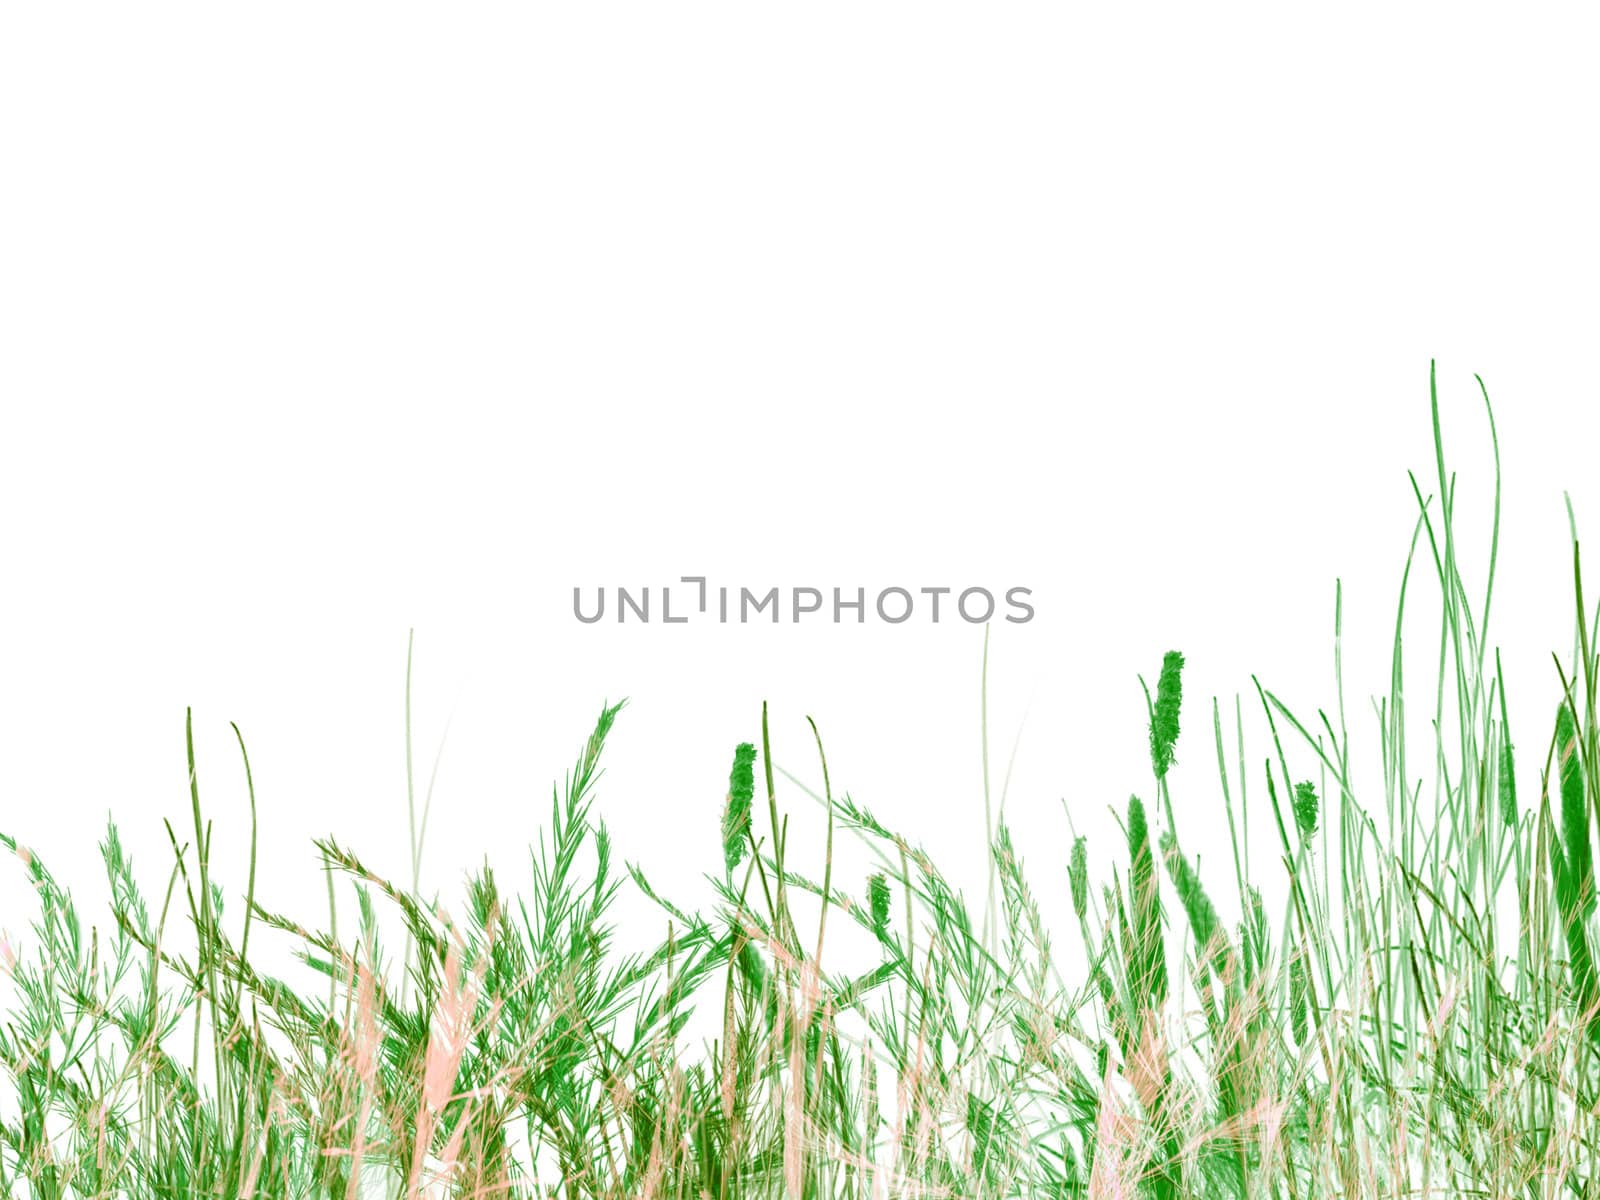 Green Grass and Reeds on White Background Texture Design As Footer